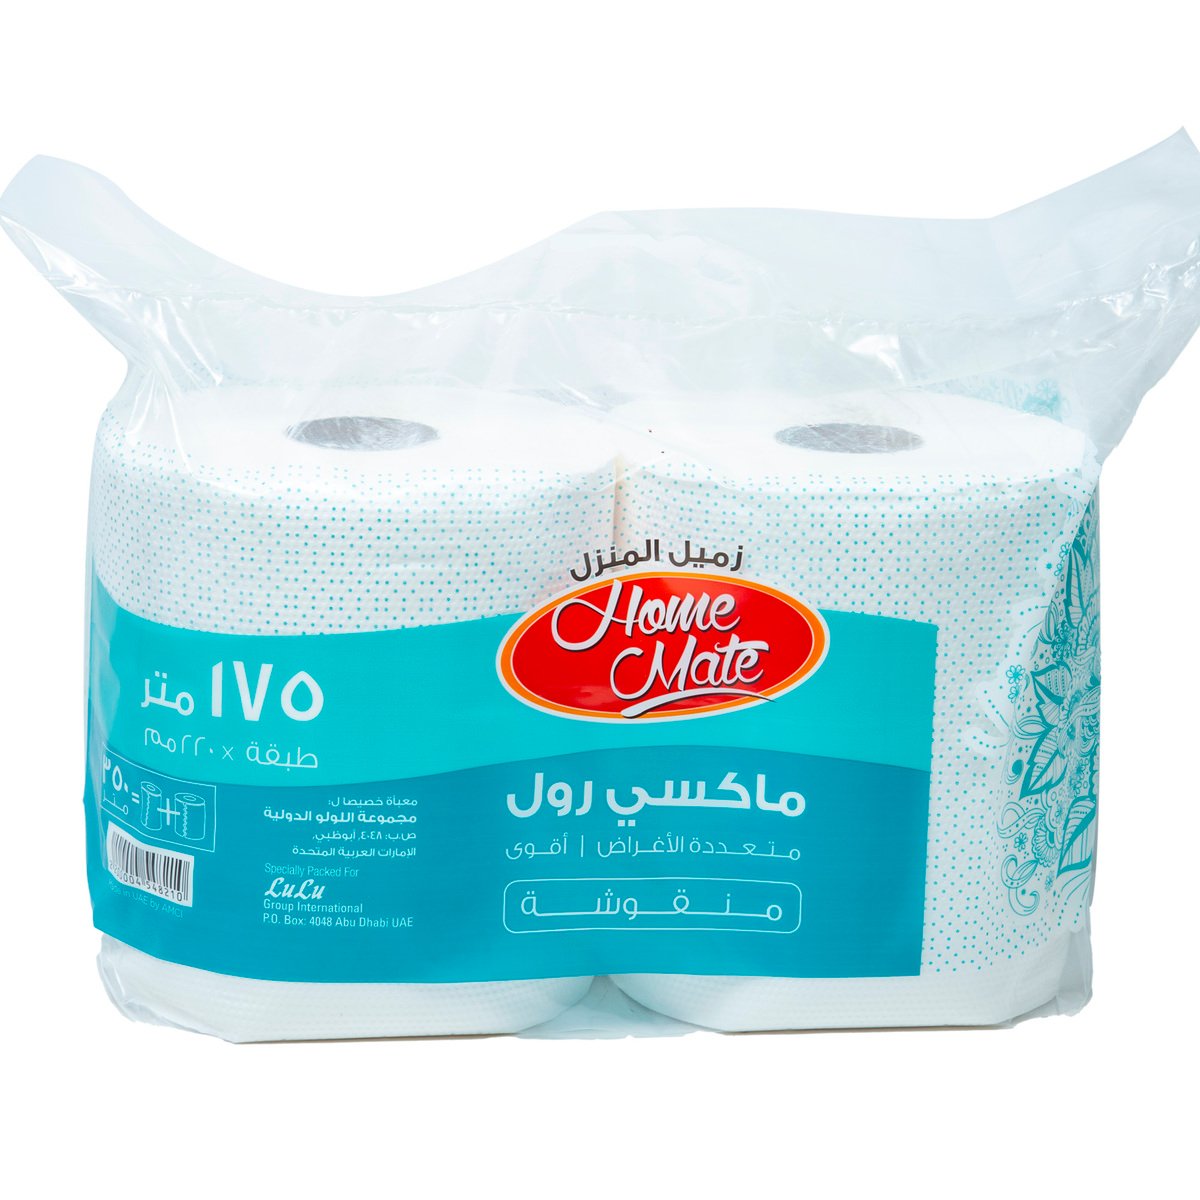 Home Mate Maxi Roll 1ply 2 Rolls